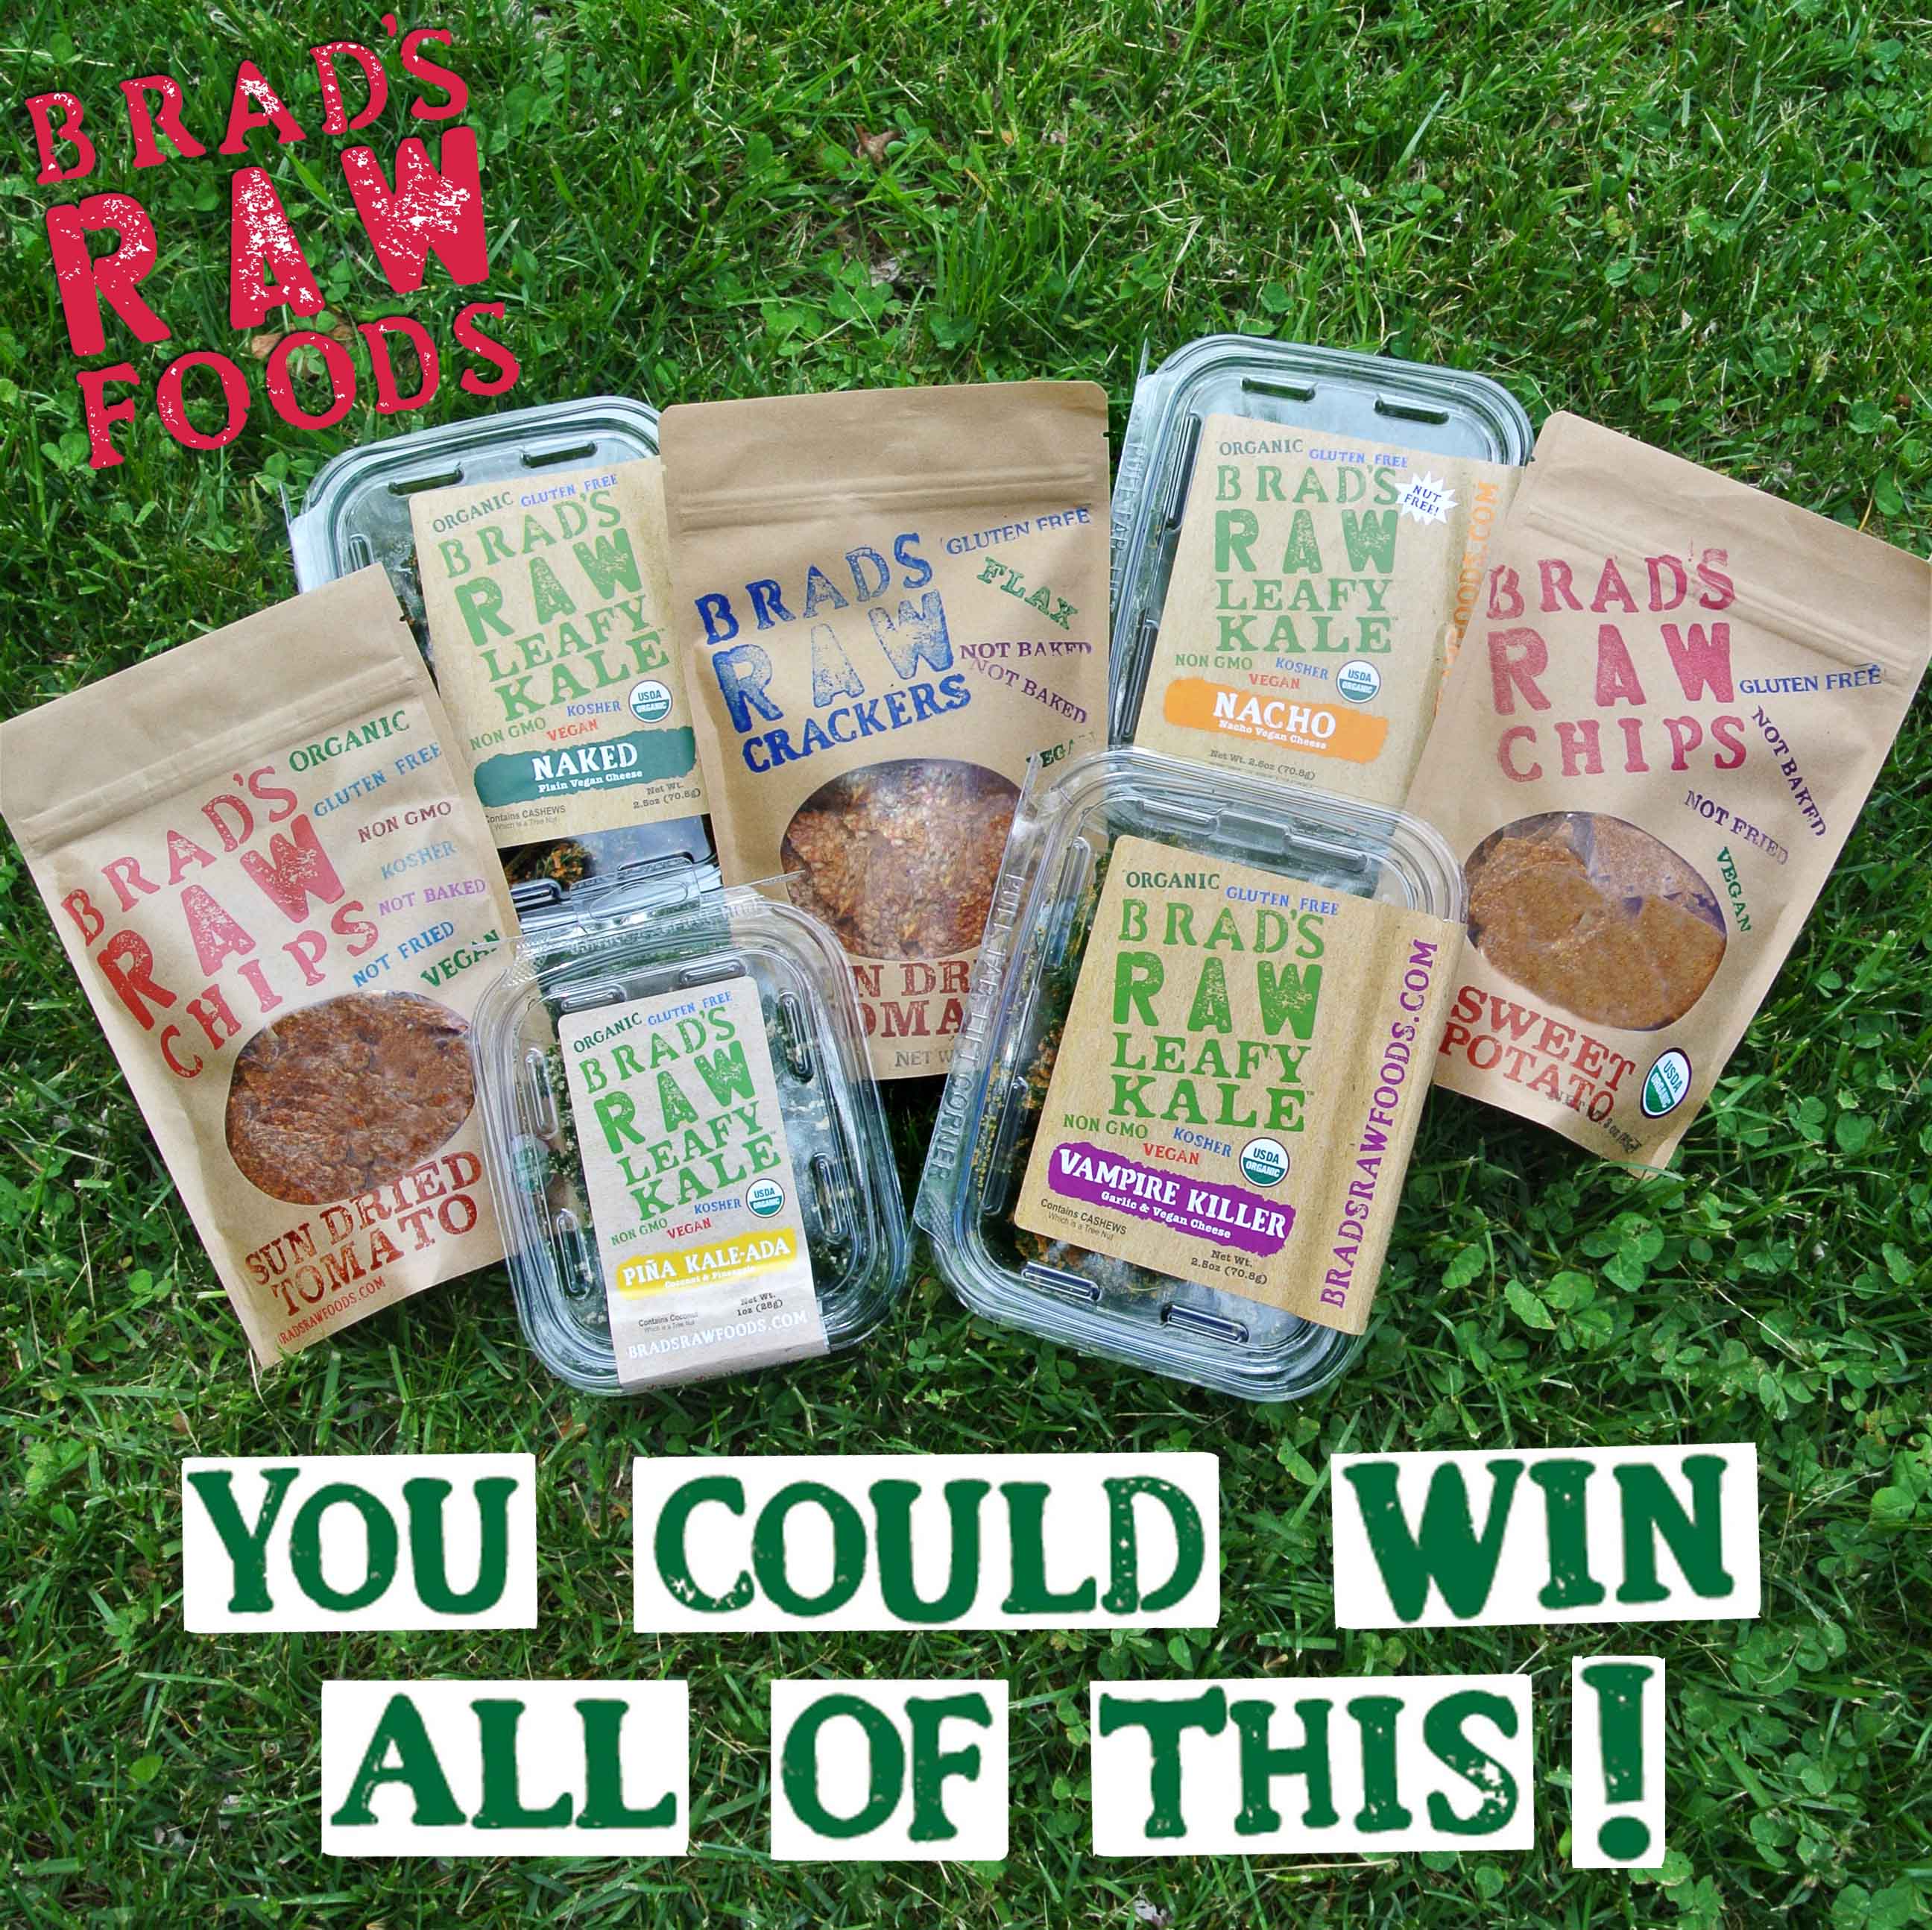 Brad’s Raw Foods Giveaway!